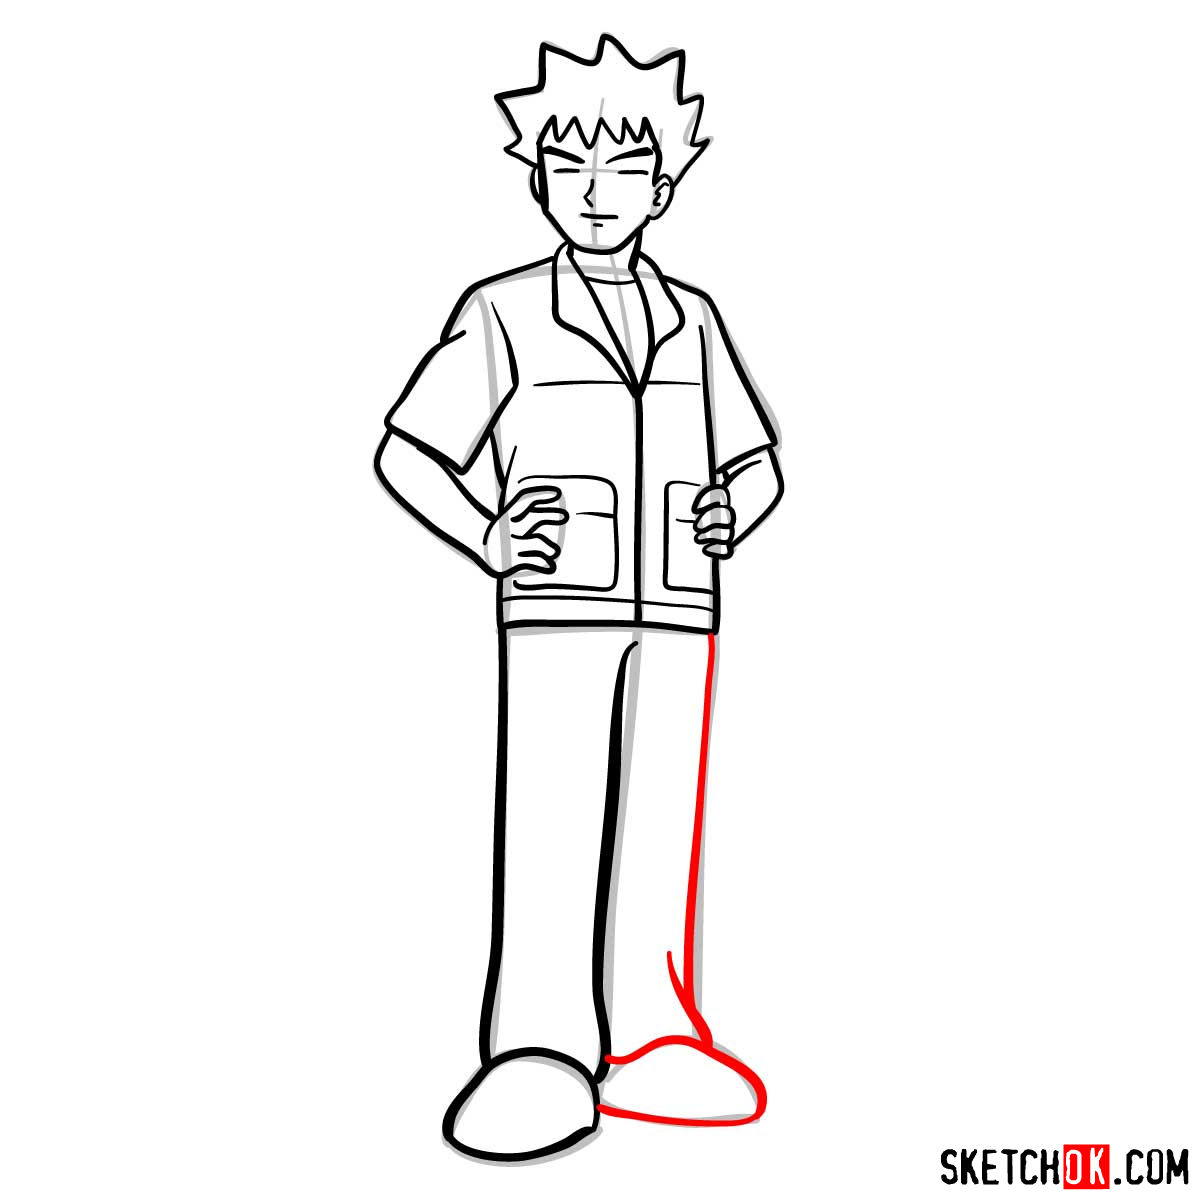 How to draw Brock from Pokemon anime - step 13